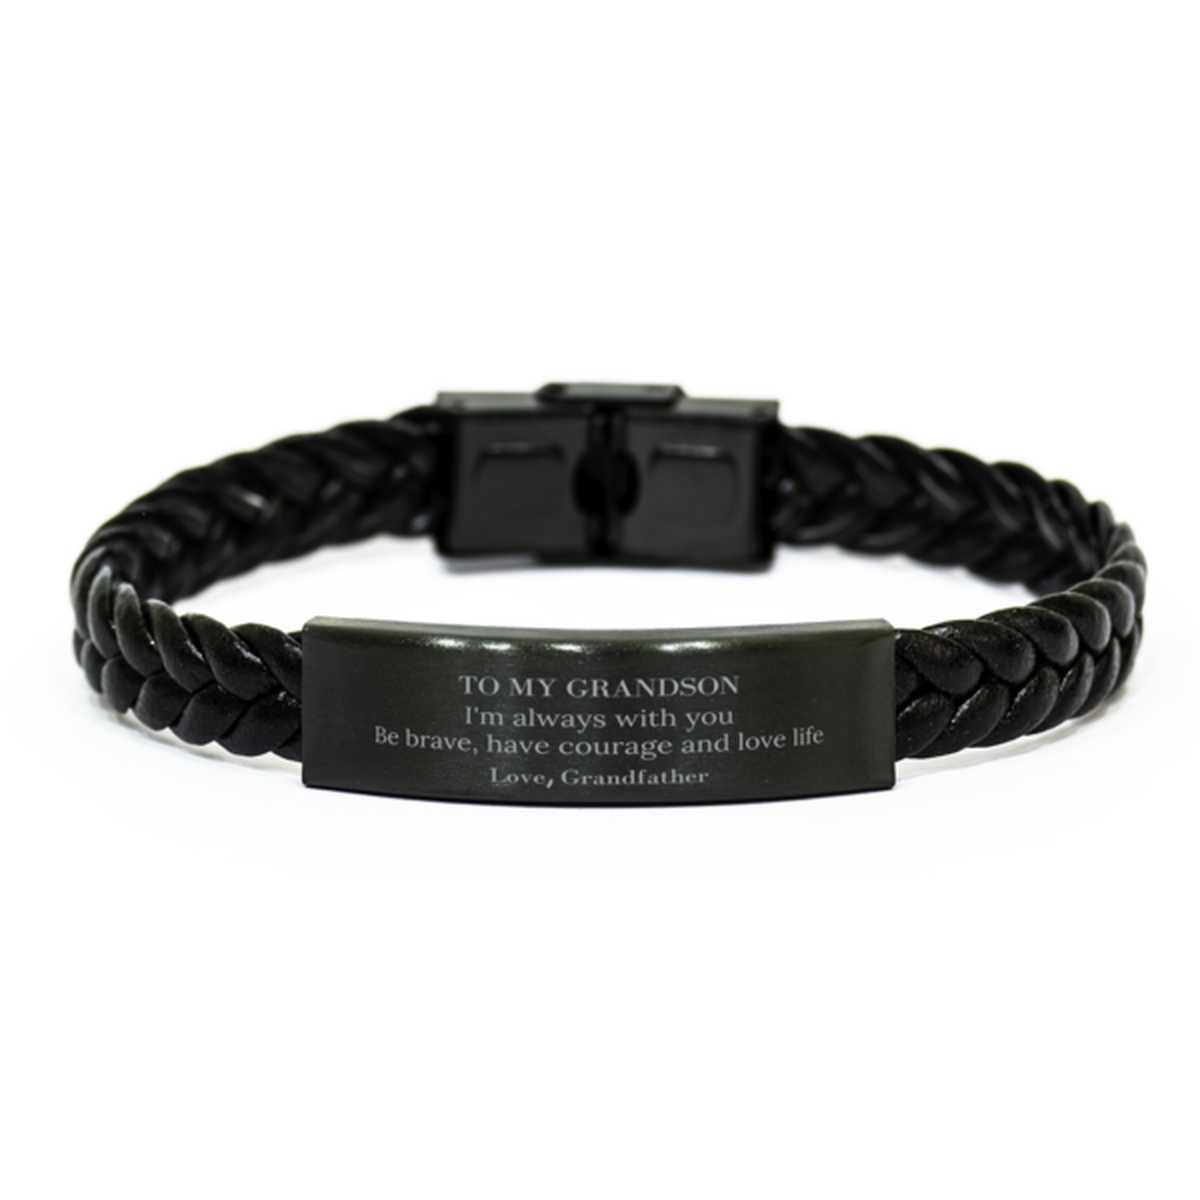 To My Grandson Gifts from Grandfather, Unique Braided Leather Bracelet Inspirational Christmas Birthday Graduation Gifts for Grandson I'm always with you. Be brave, have courage and love life. Love, Grandfather